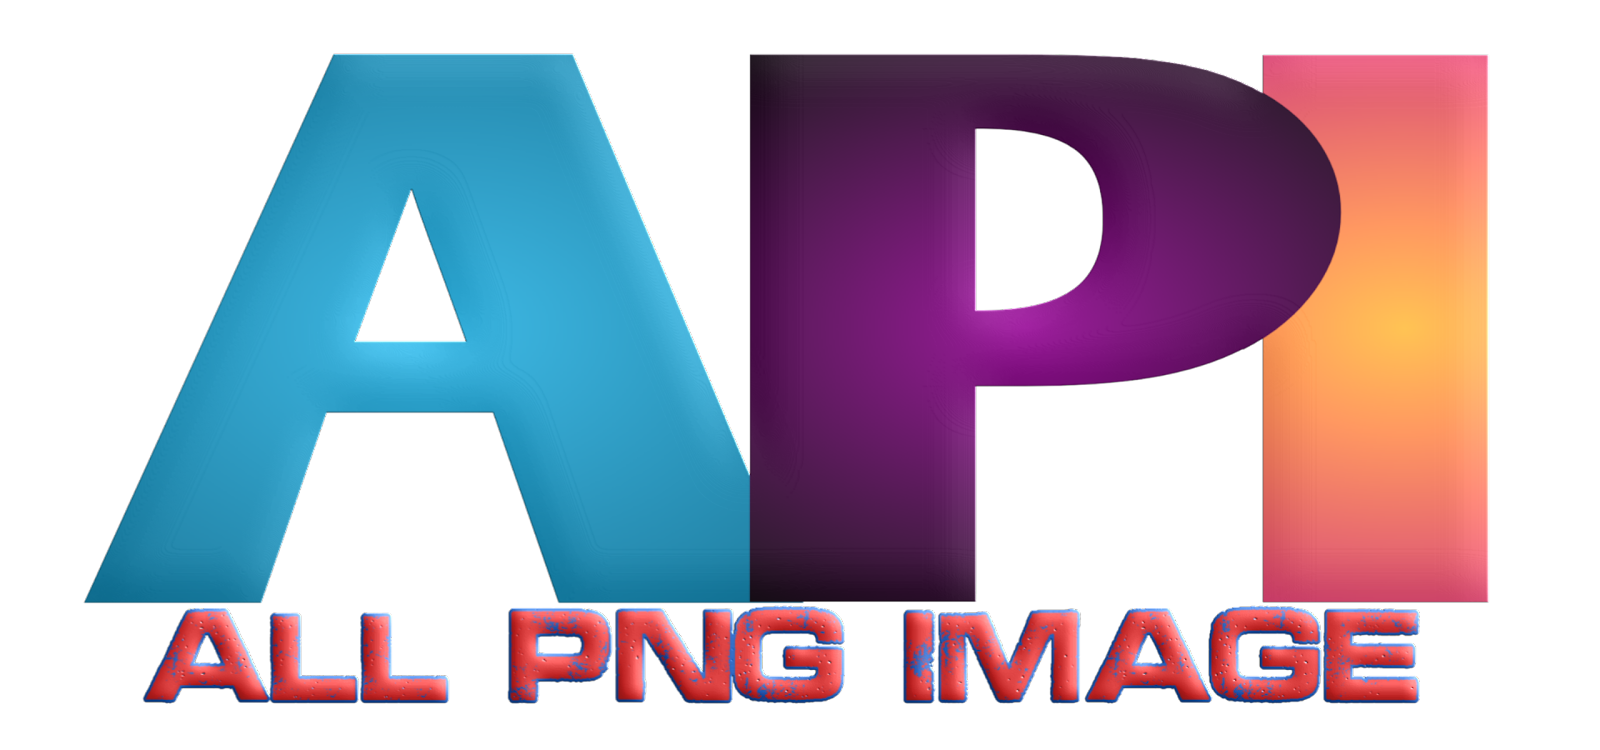 All png images - PNG images gallery